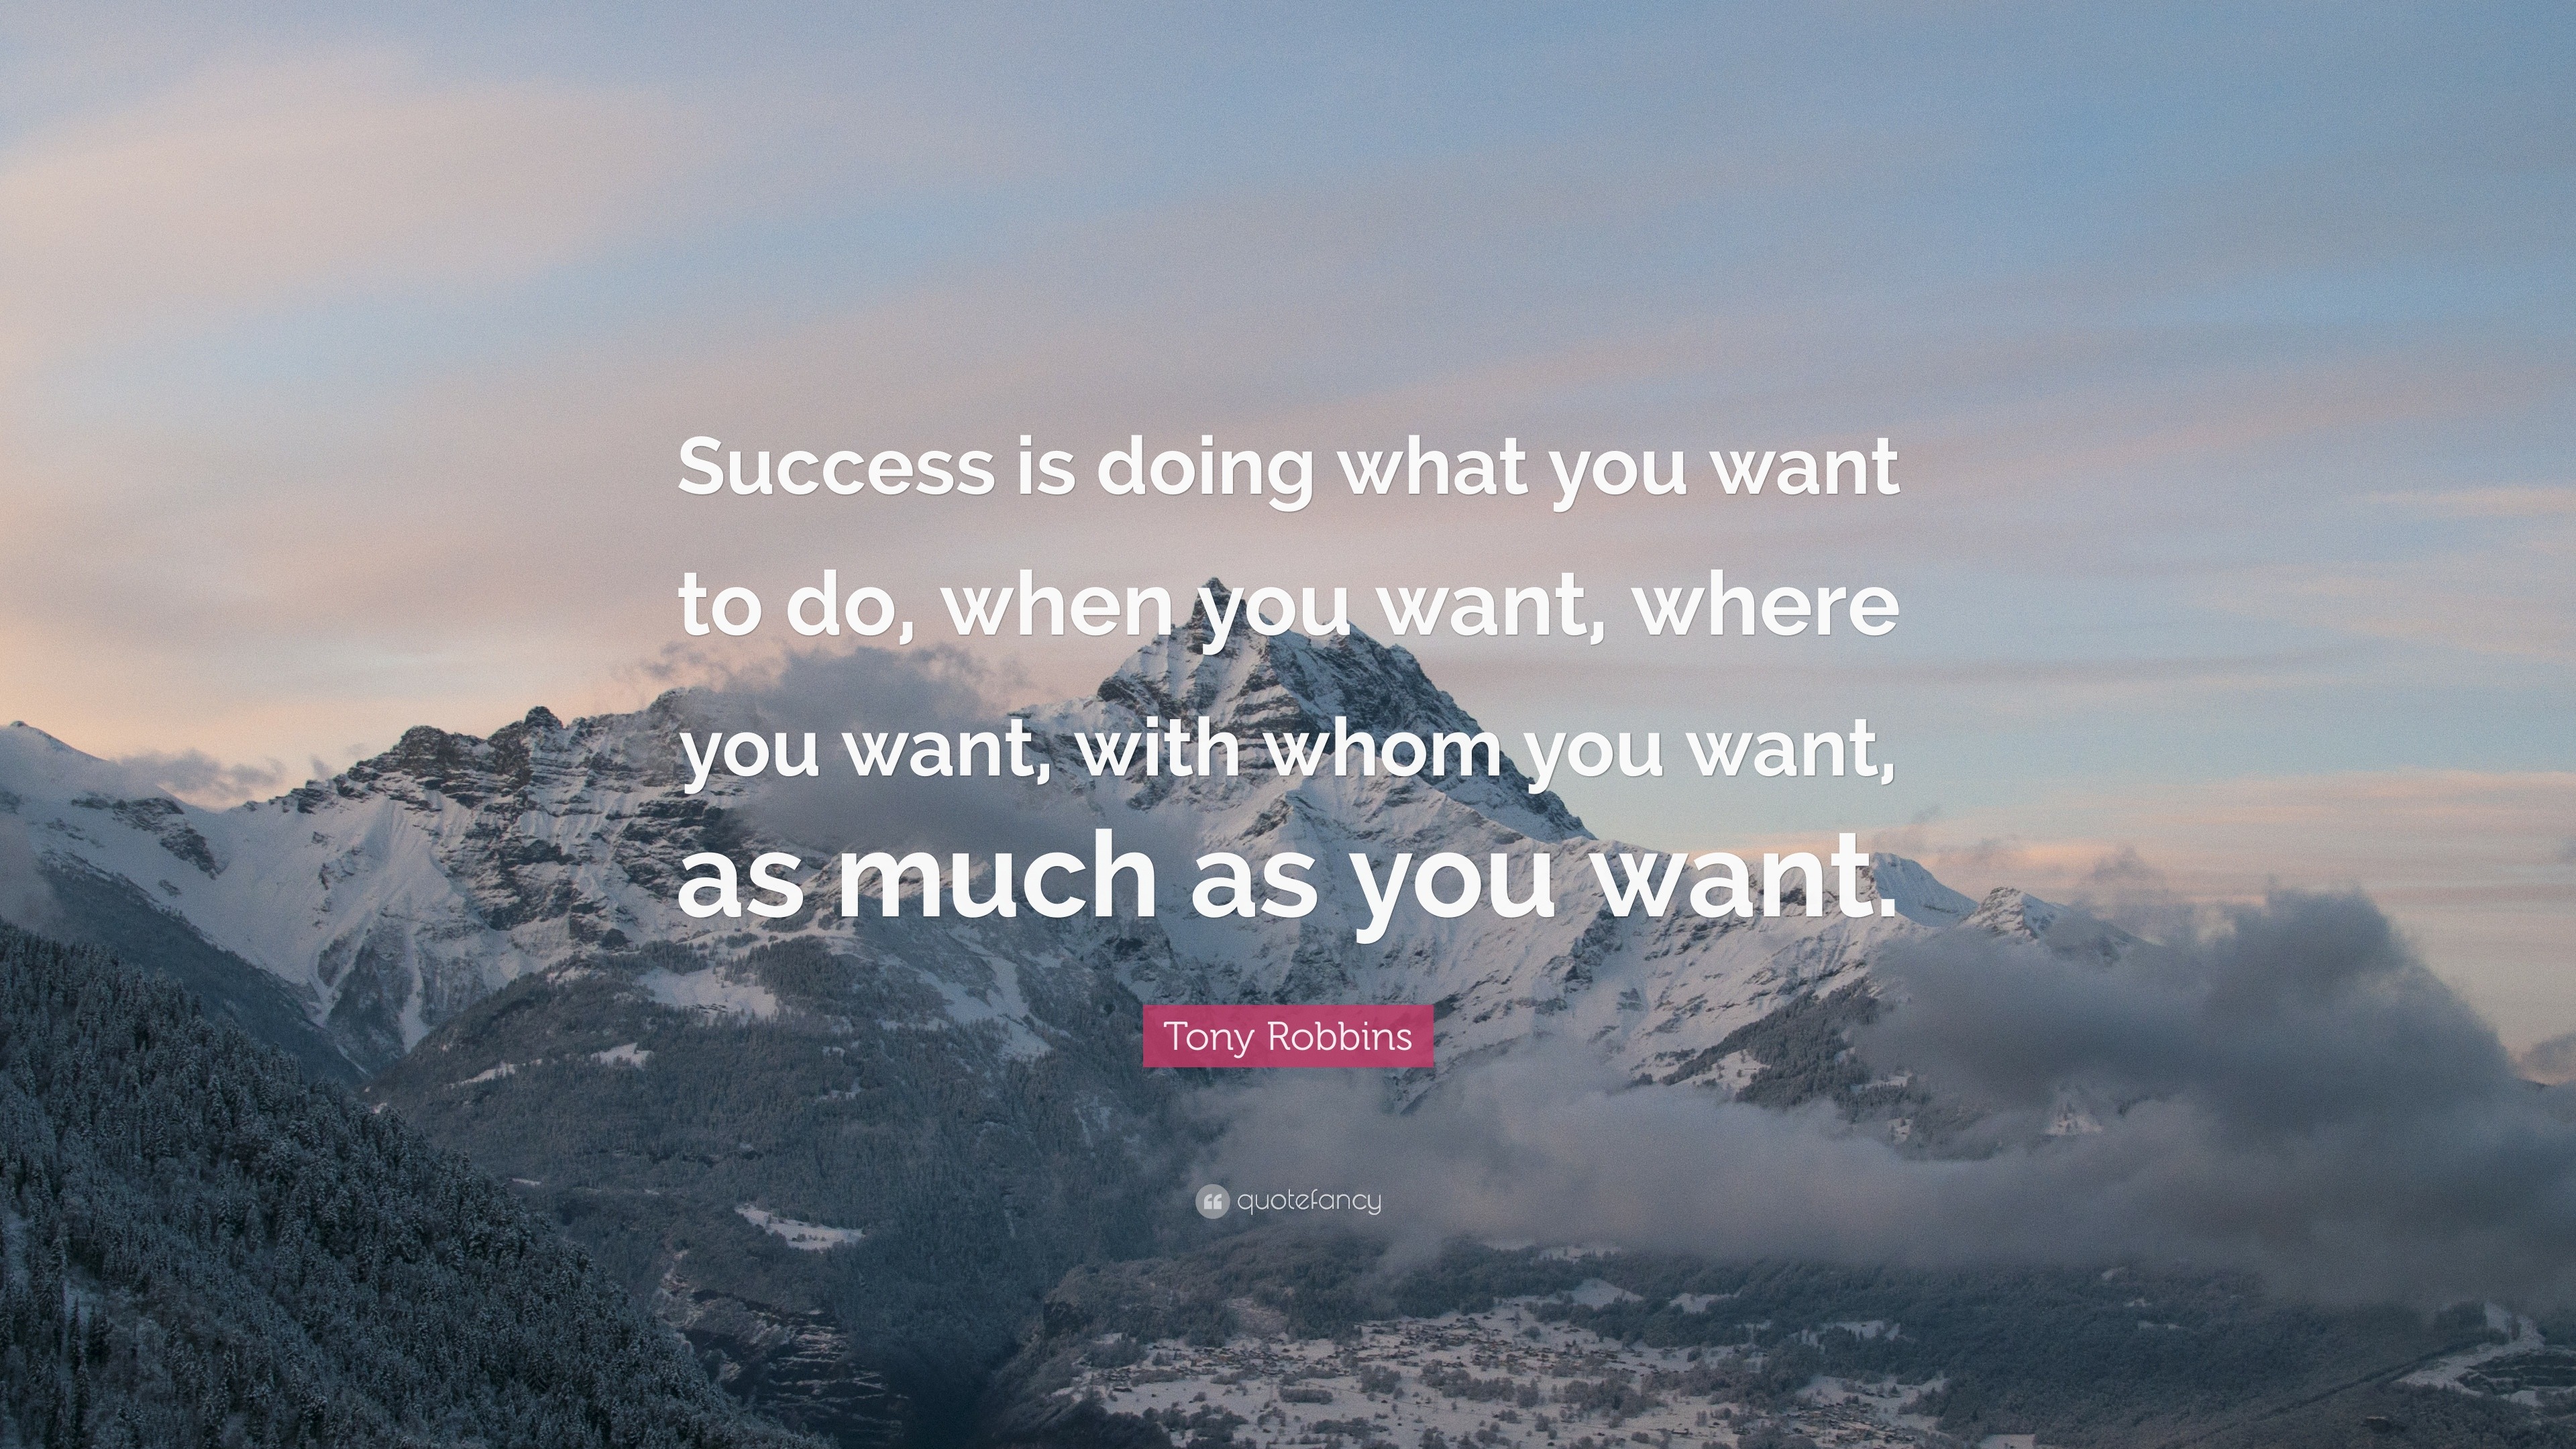 Tony Robbins Quote: “Success is doing what you want to do, when you ...